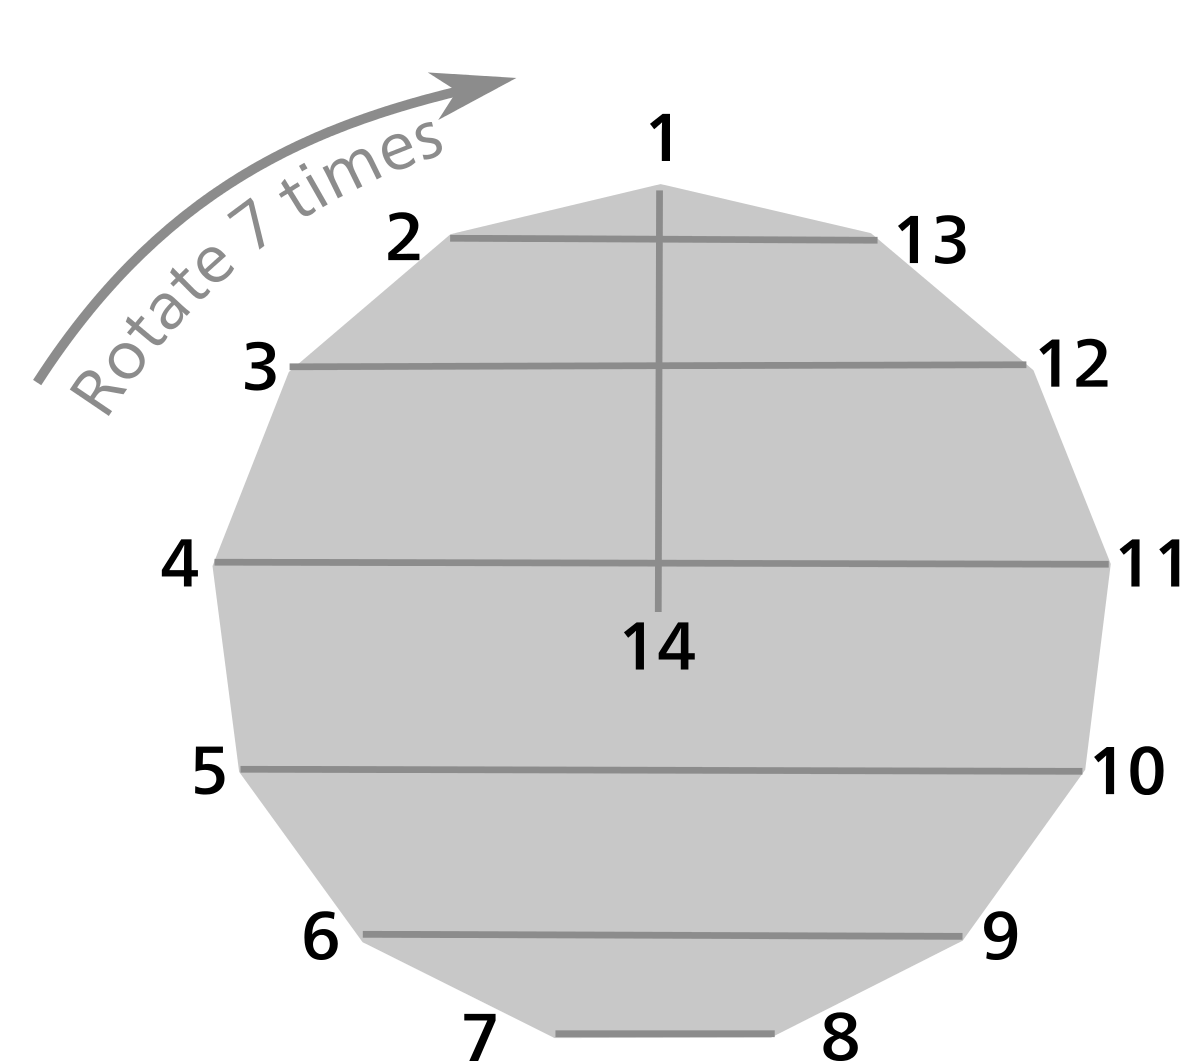 File:Round-Robin-Schedule-Span-Diagram.Svg - Wikimedia Commons